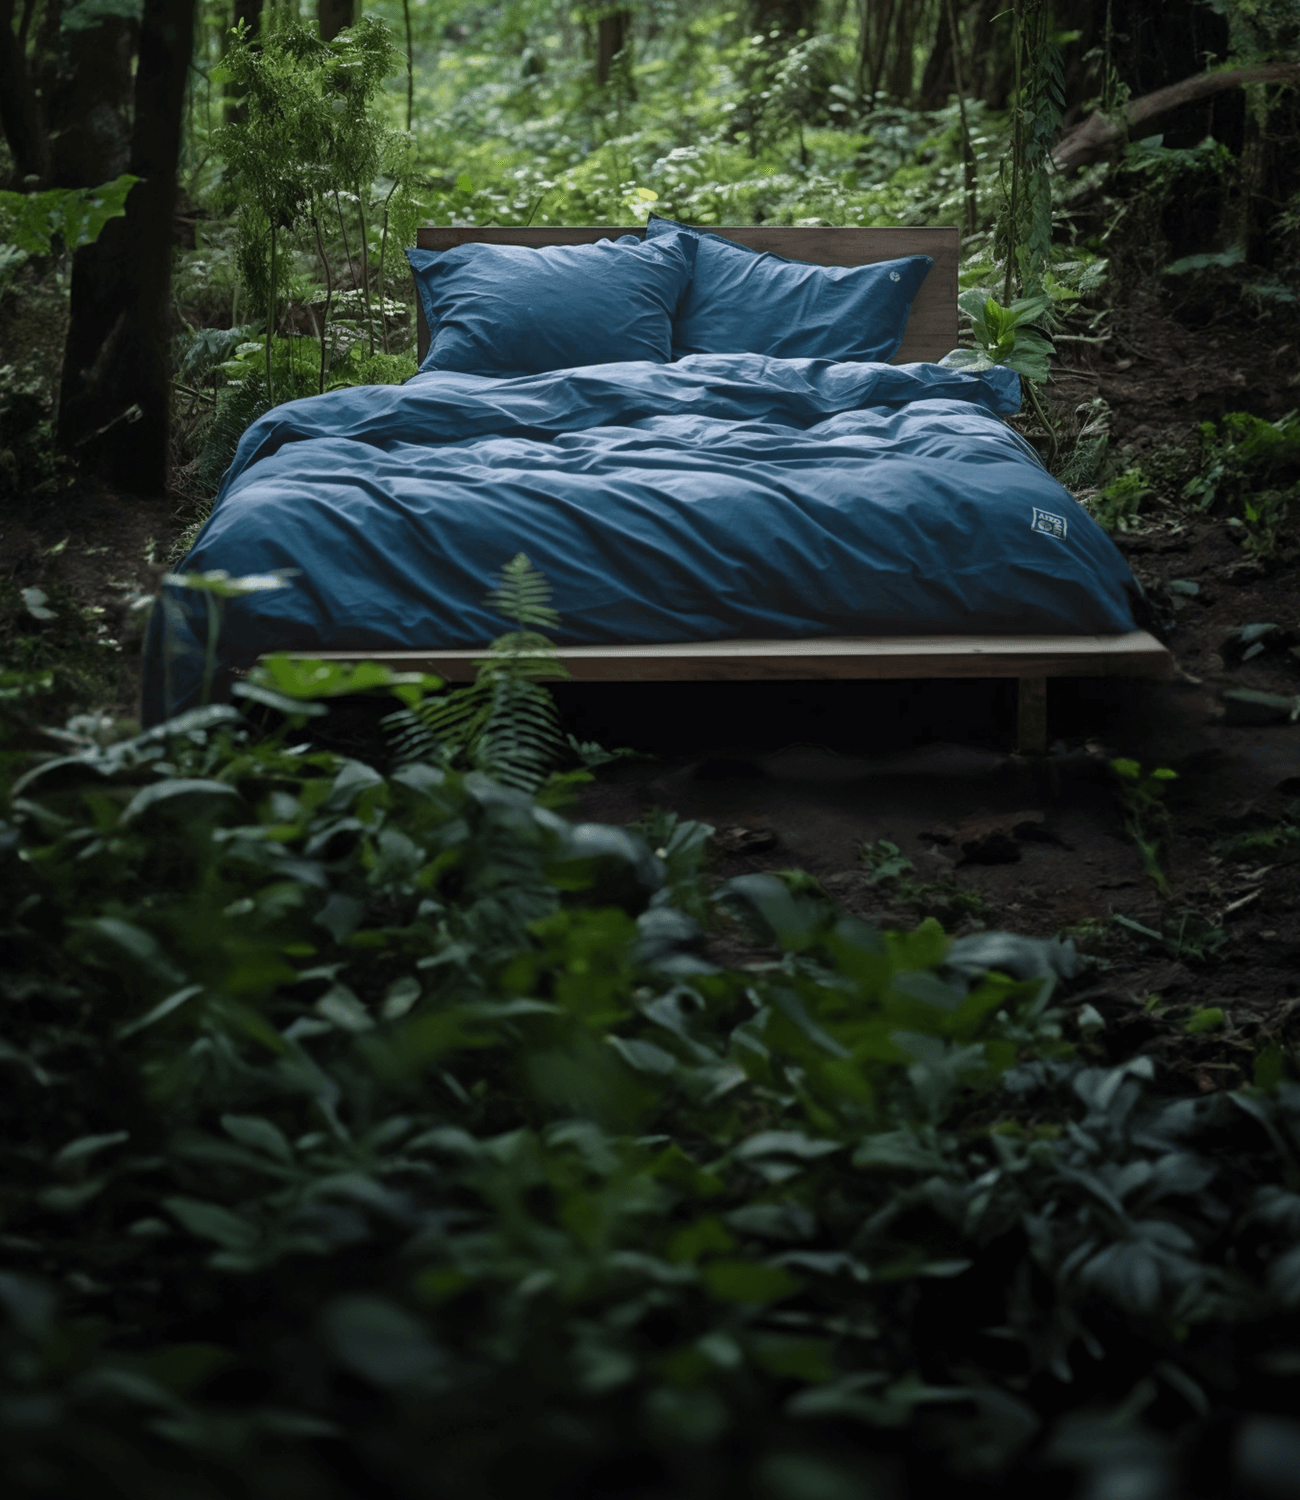 A cozy looking bed with Aizome bedding is standing in the Forest